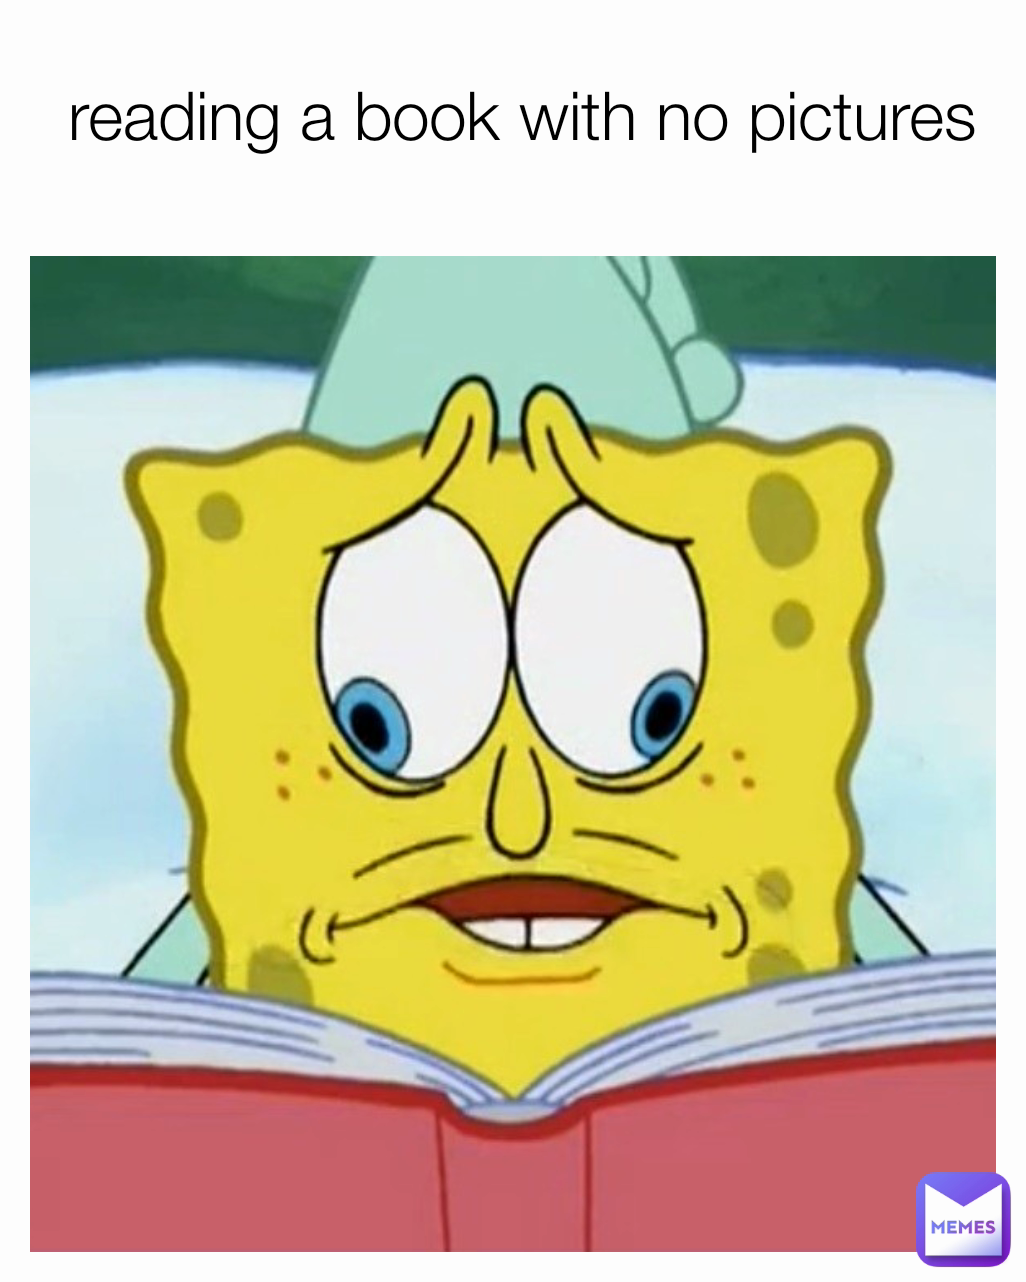 reading a book with no pictures